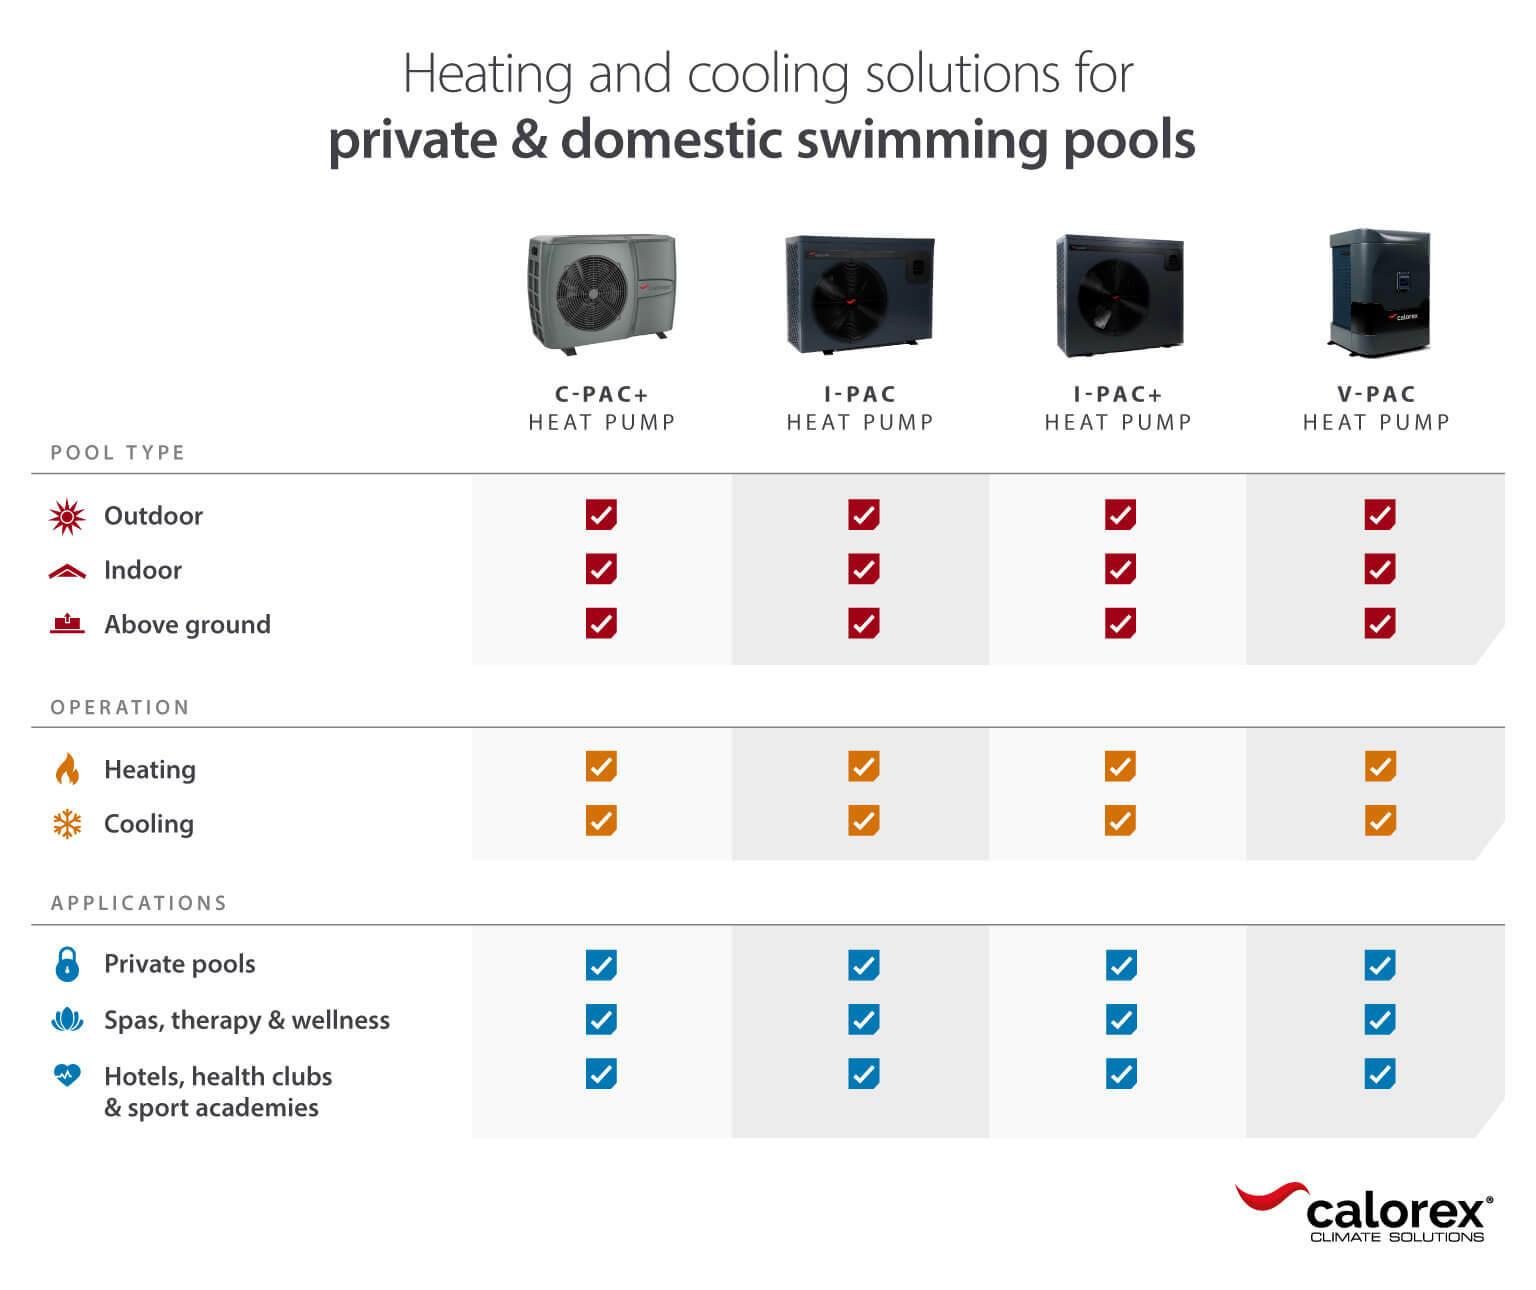 Diagram to compare Calorex pool heat pump models by pool type, operation and applications